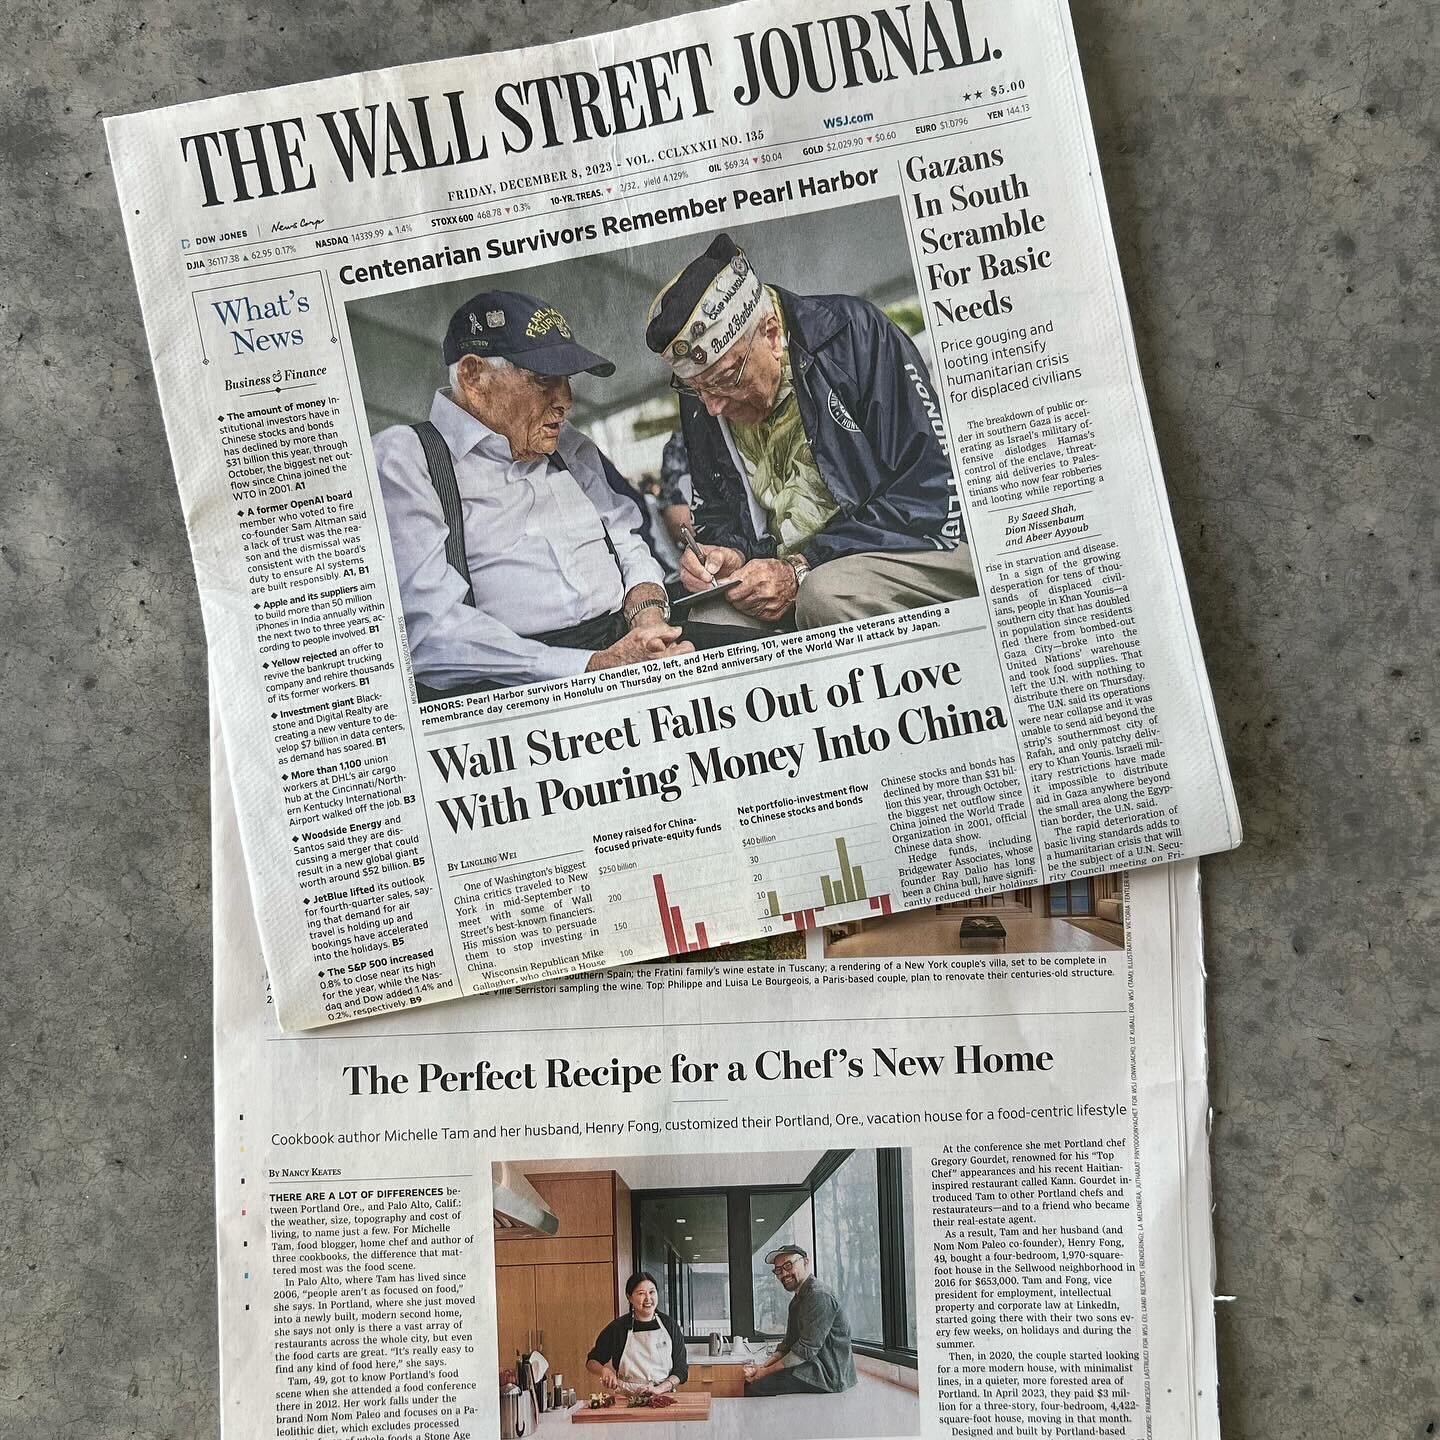 Royal II feature is out today in the print issue of The Wall Street Journal.

&ldquo;The steel-and-concrete house drops off the street and terraces down a steep slope with all three levels open to the tall Douglas firs and alders through floor-to-cei